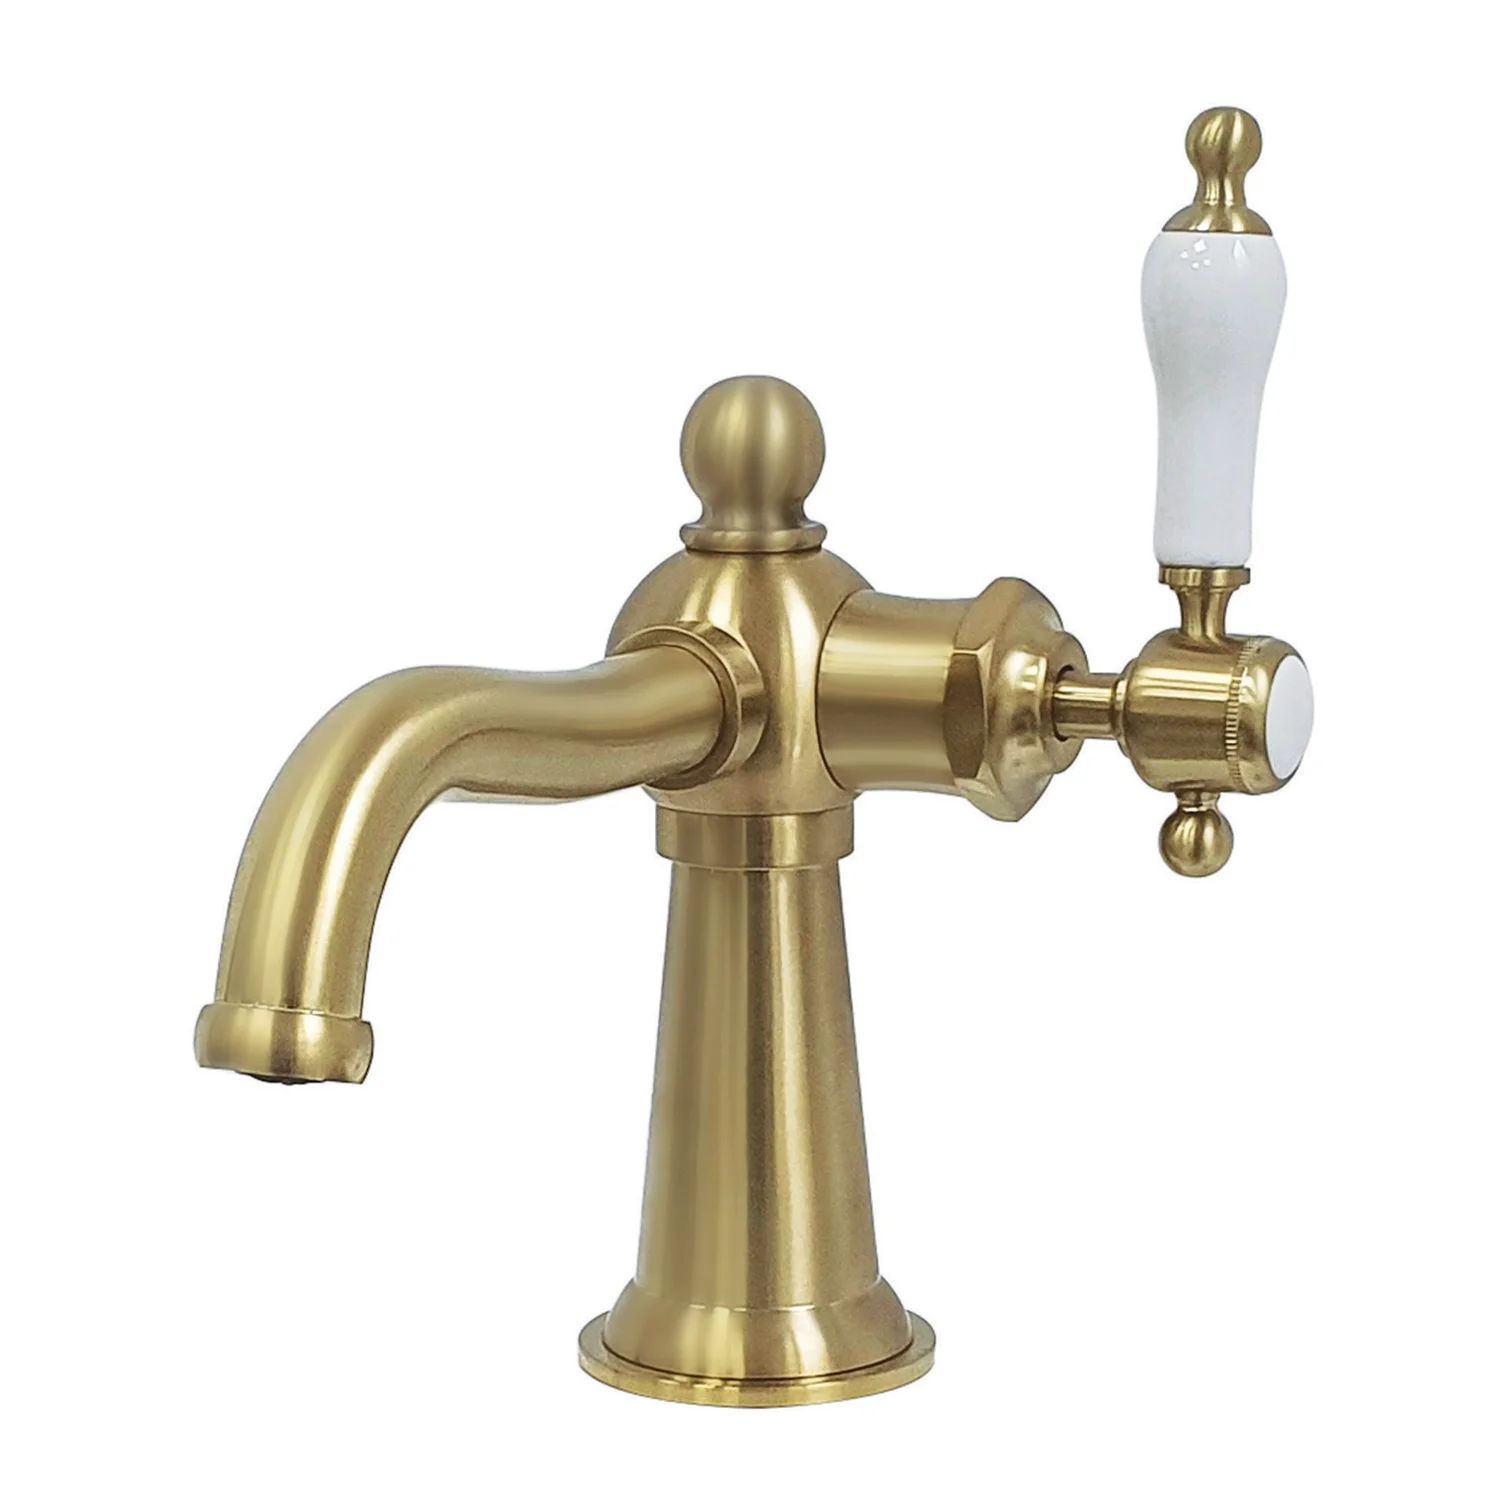 Whitaker Single Hole Bathroom Faucet with Drain Assembly | Wayfair North America